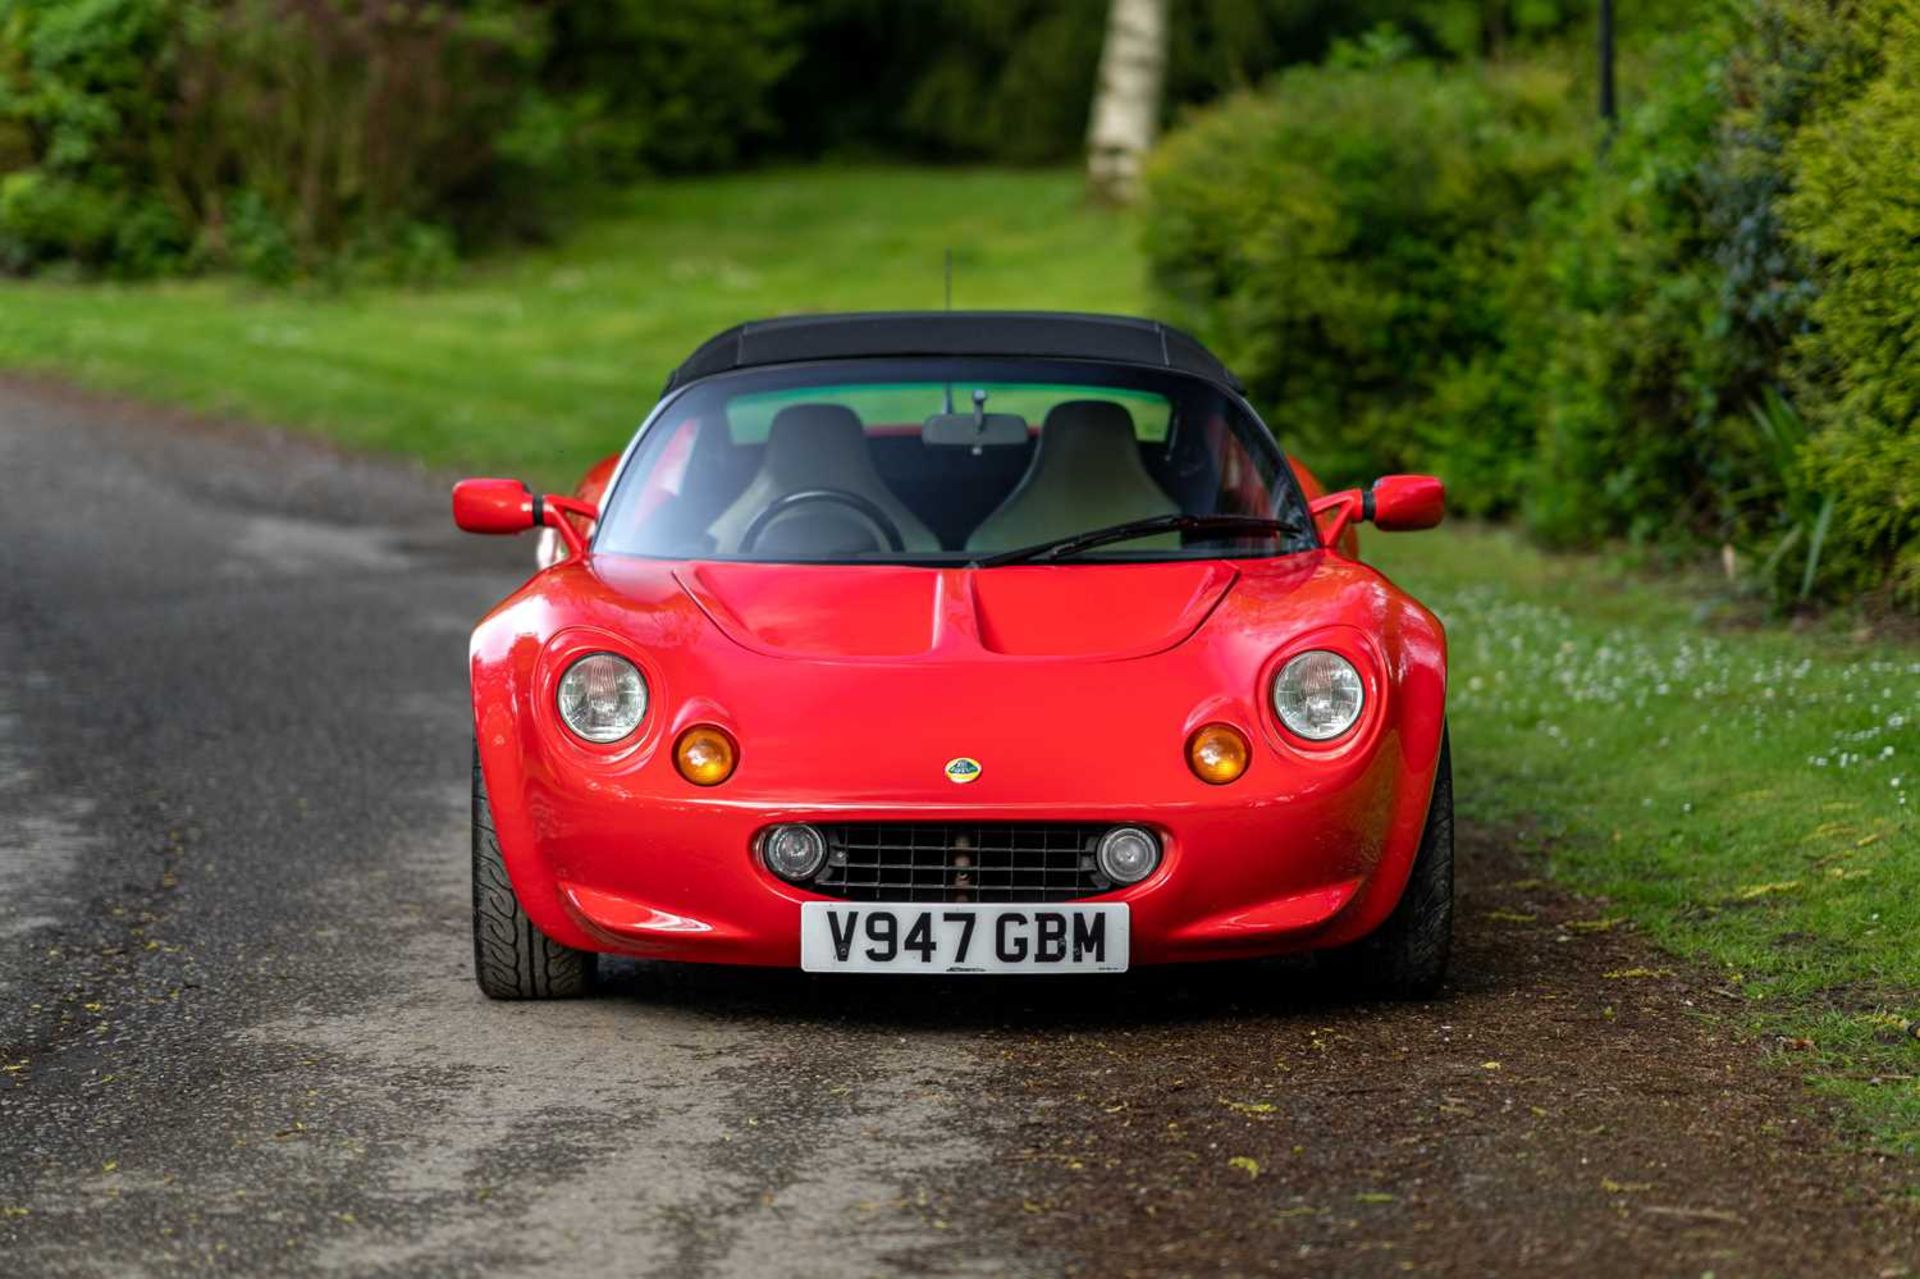 1999 Lotus Elise S1 Only 39,000 miles from new - Image 13 of 57